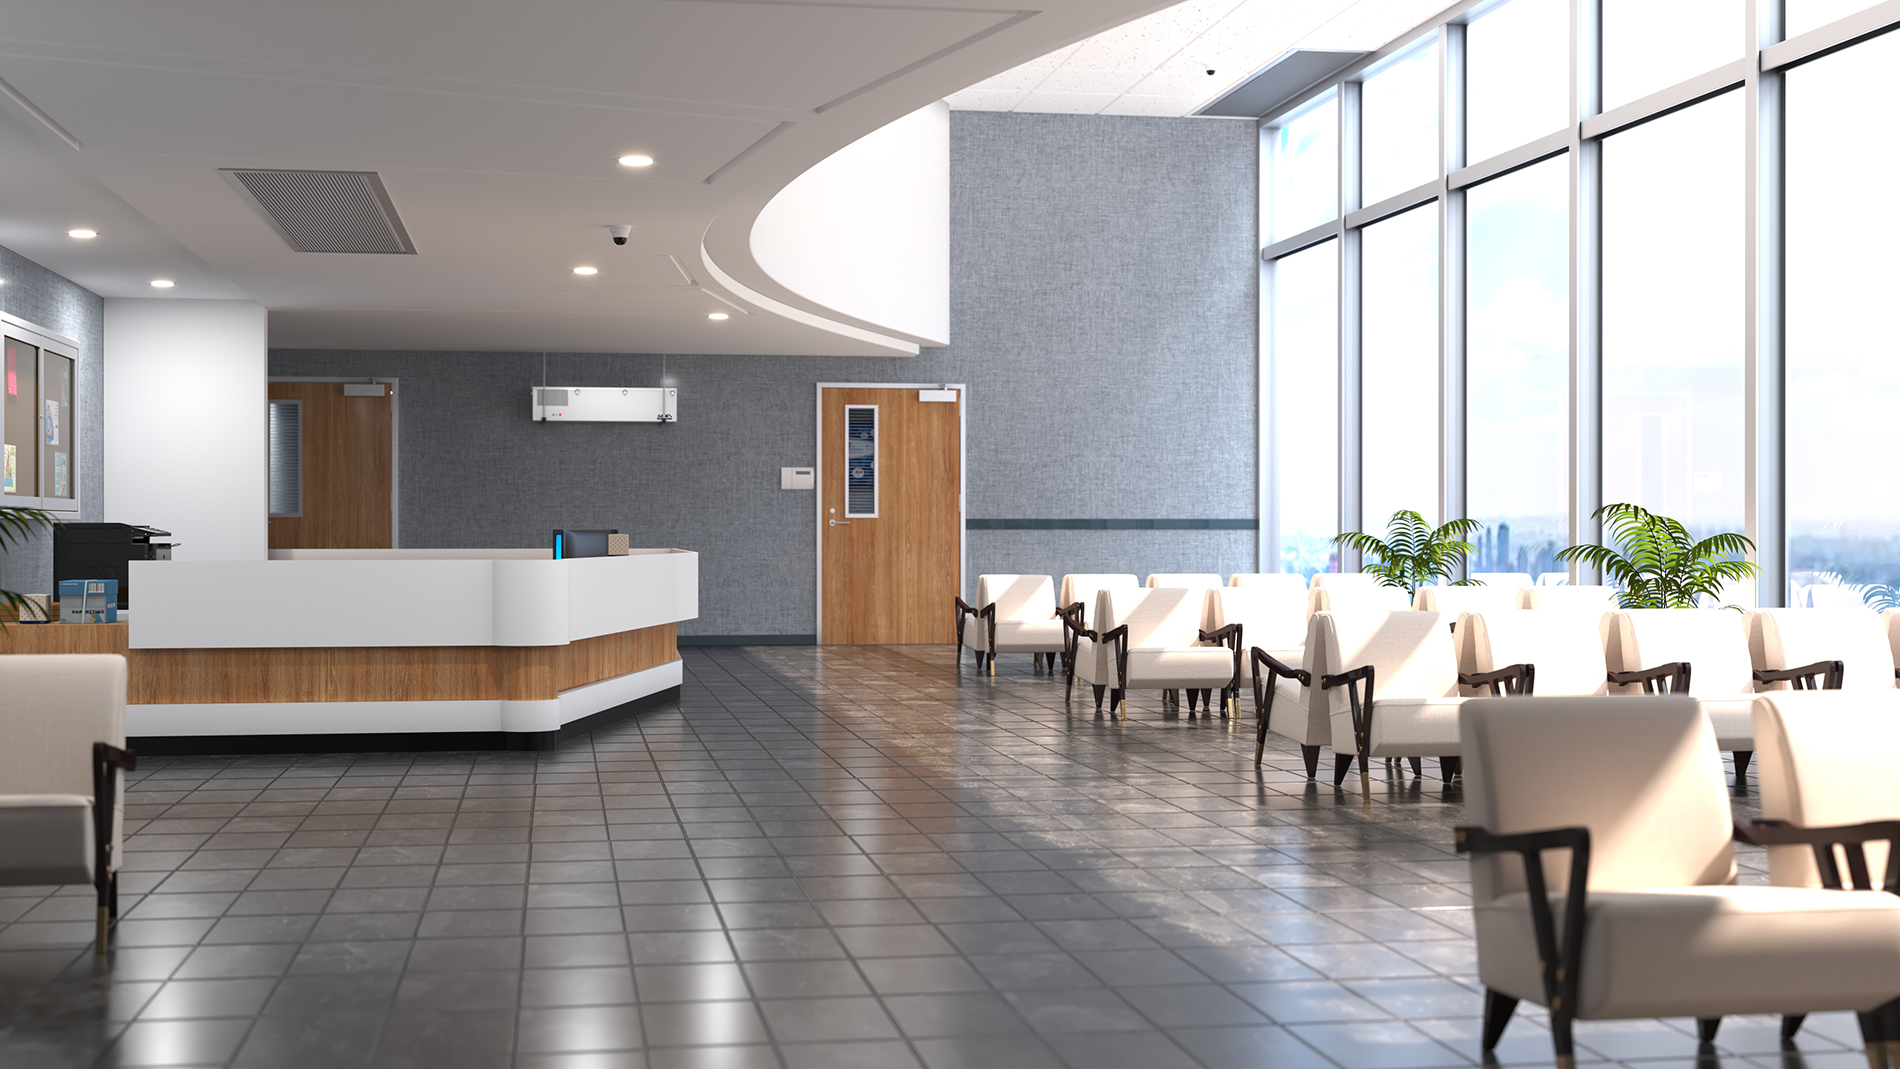 UV Air Purifier helps reduce disease transmission in hospital waiting rooms